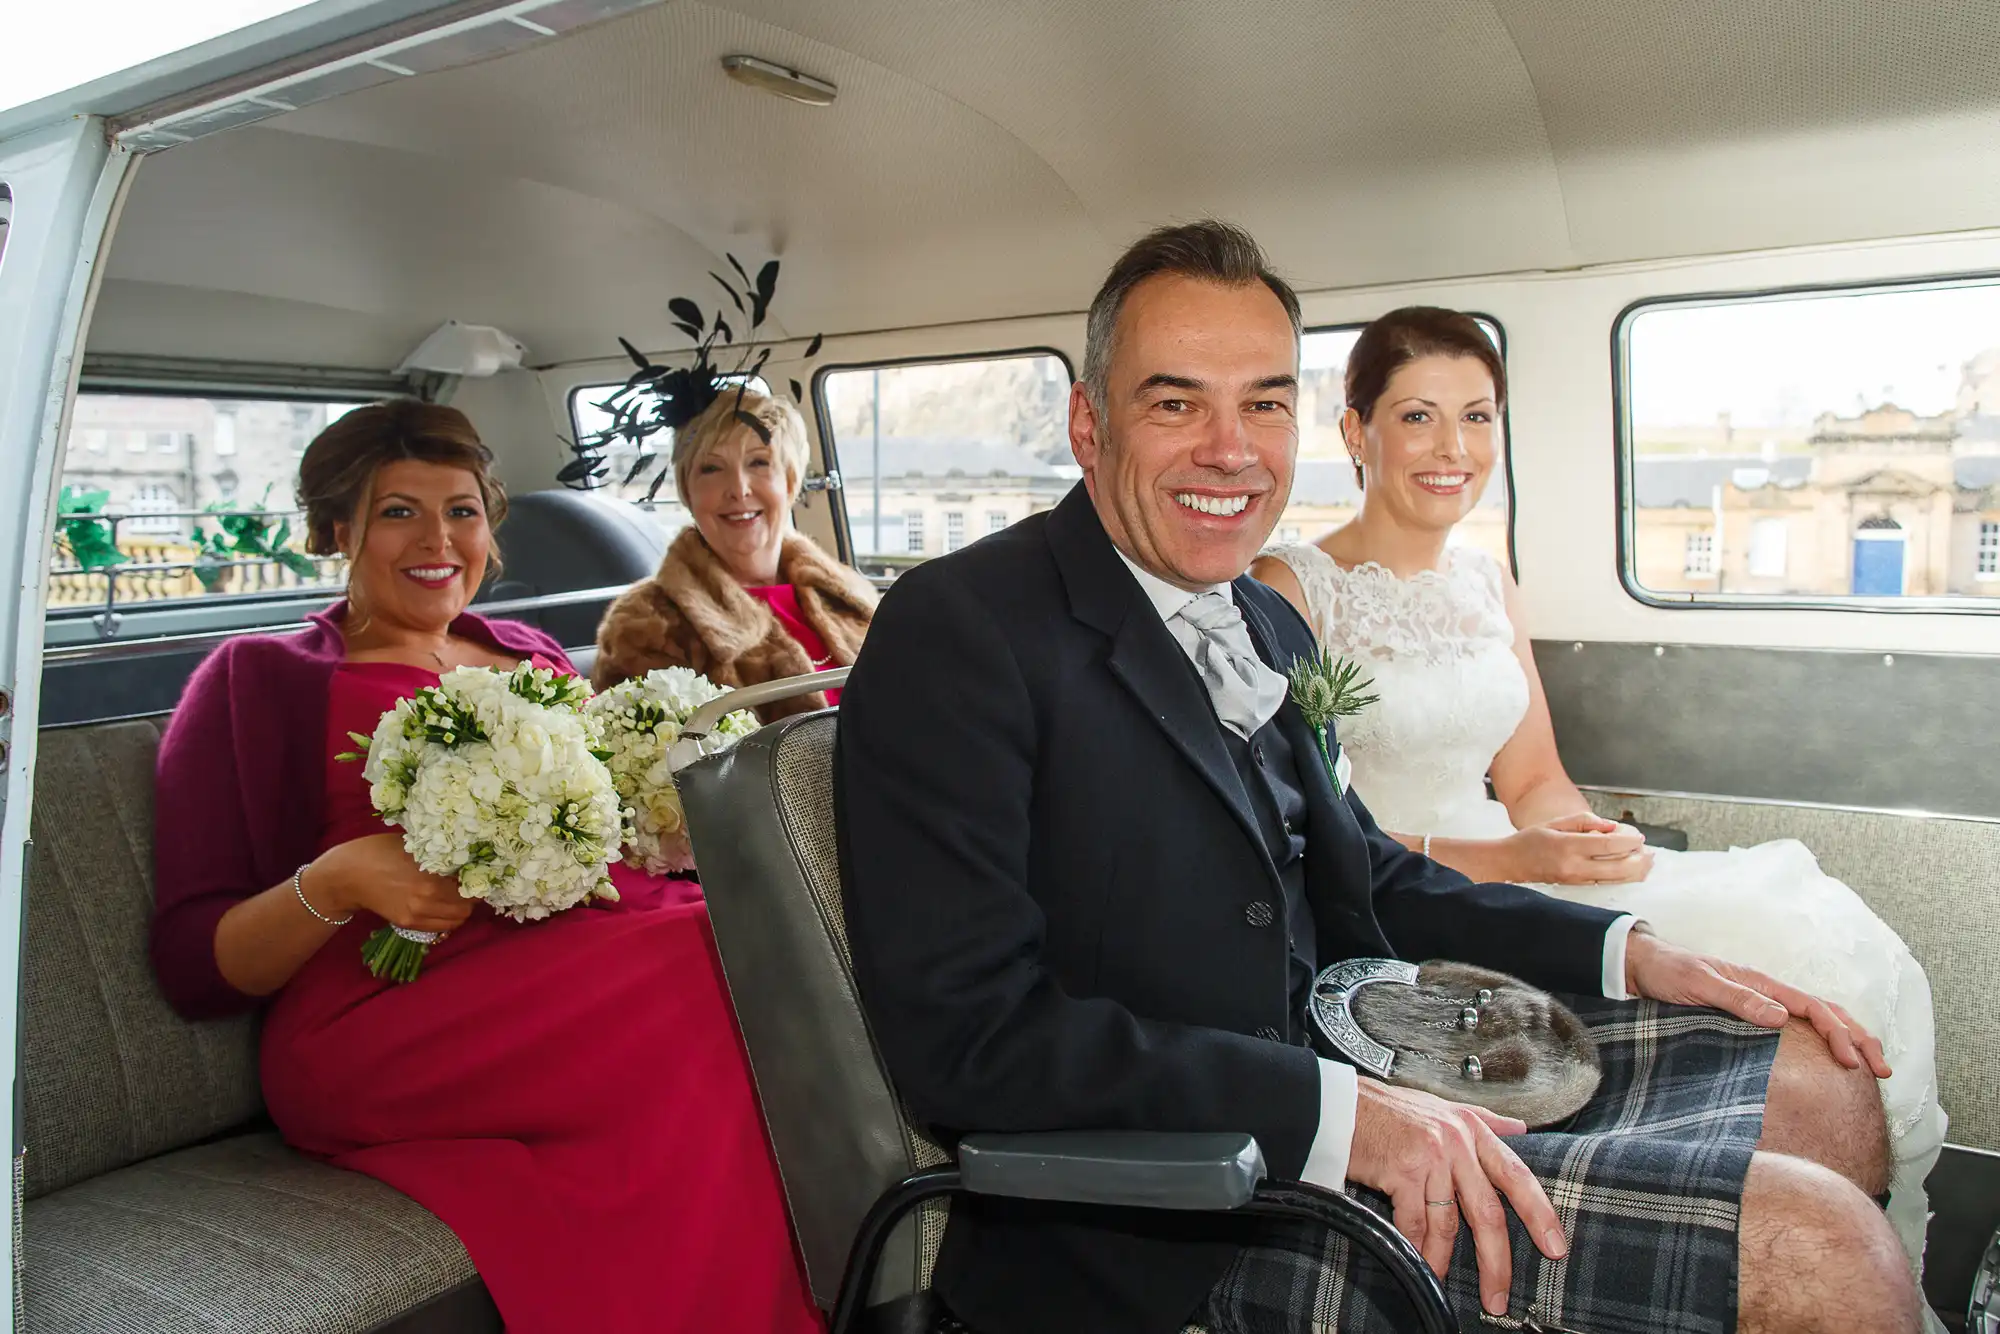 Bride, groom in kilt, and two female guests smiling inside a classic car, with floral bouquets and formal attire.